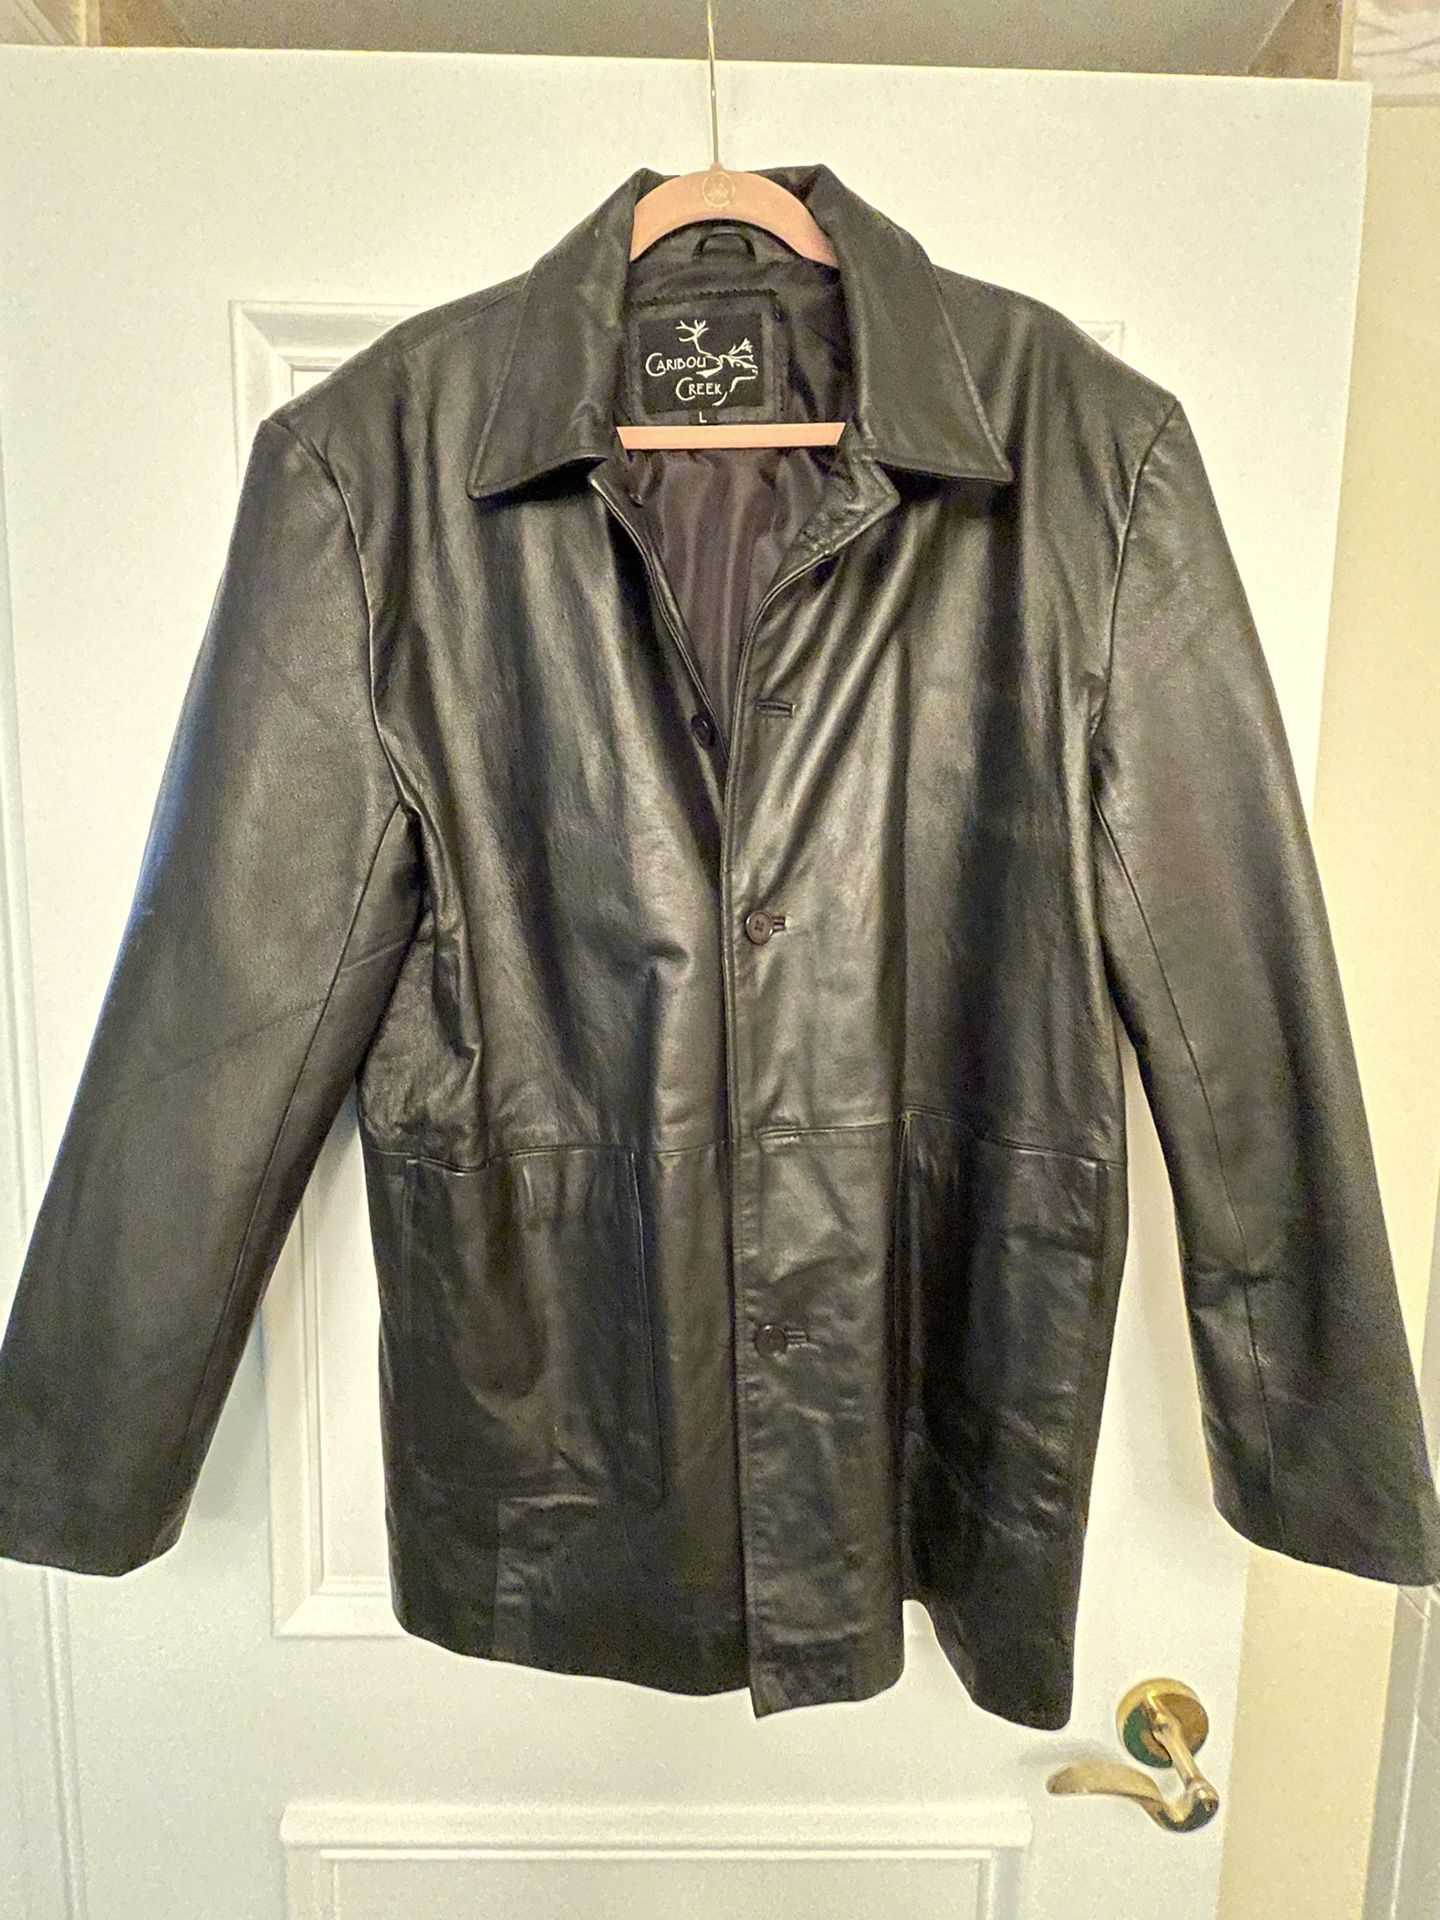 Black Leather Jacket Caribou Creek Size Large, Unisex  , Comes Down to The Area Below The Waist ,